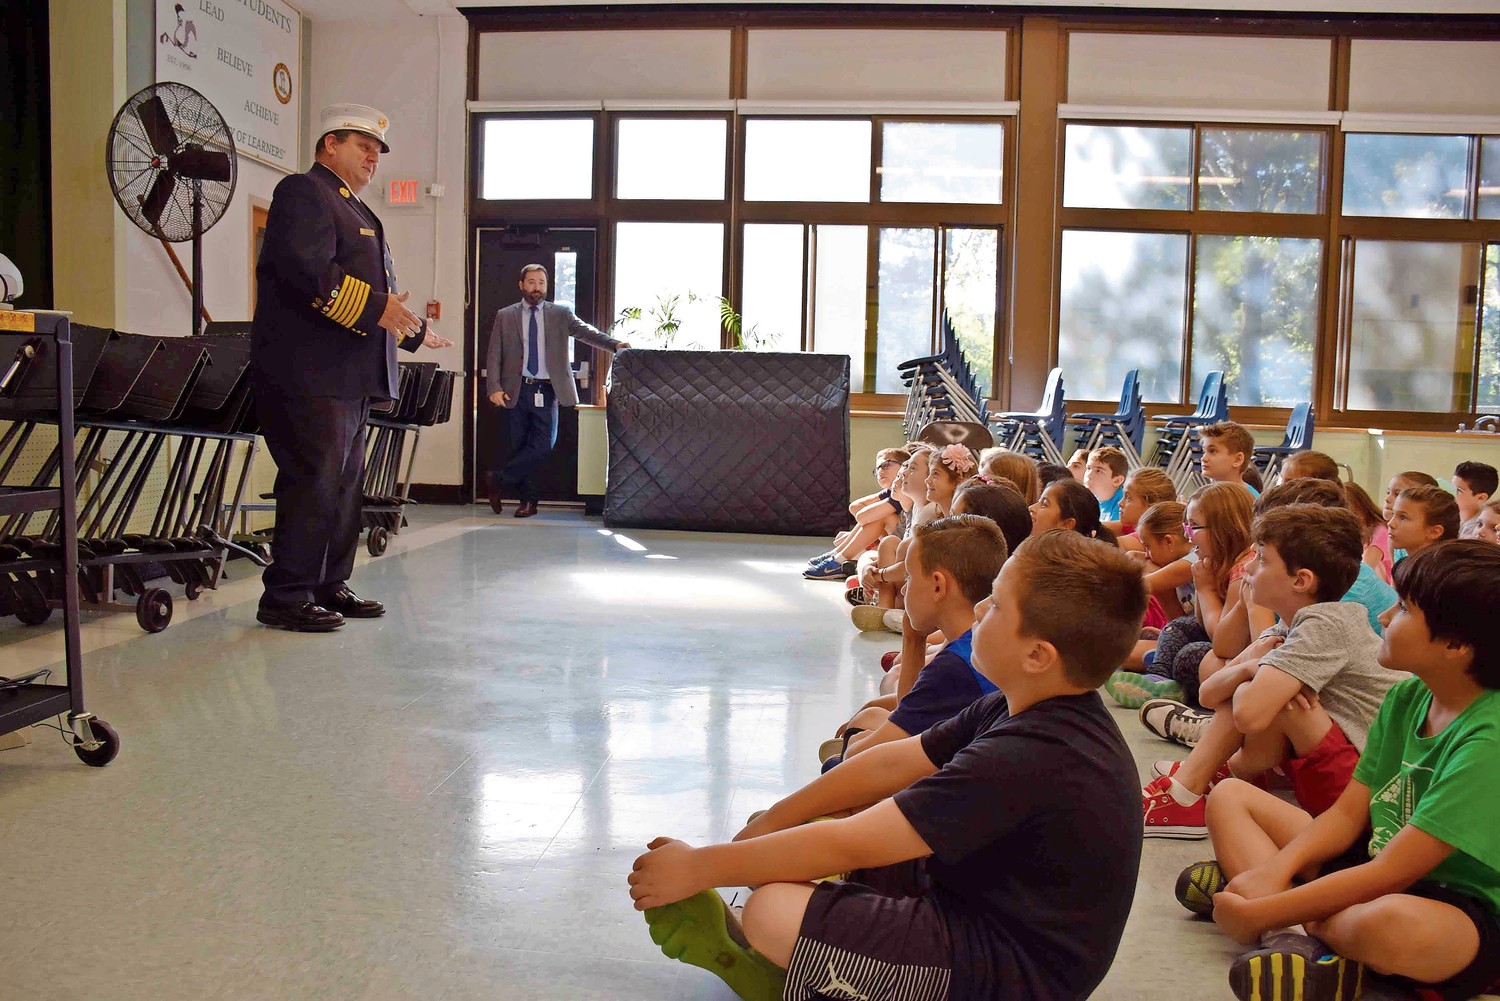 Wantagh firefighter John Loeber spoke to third, fourth and fifth-graders about what to do in a fire emergency.